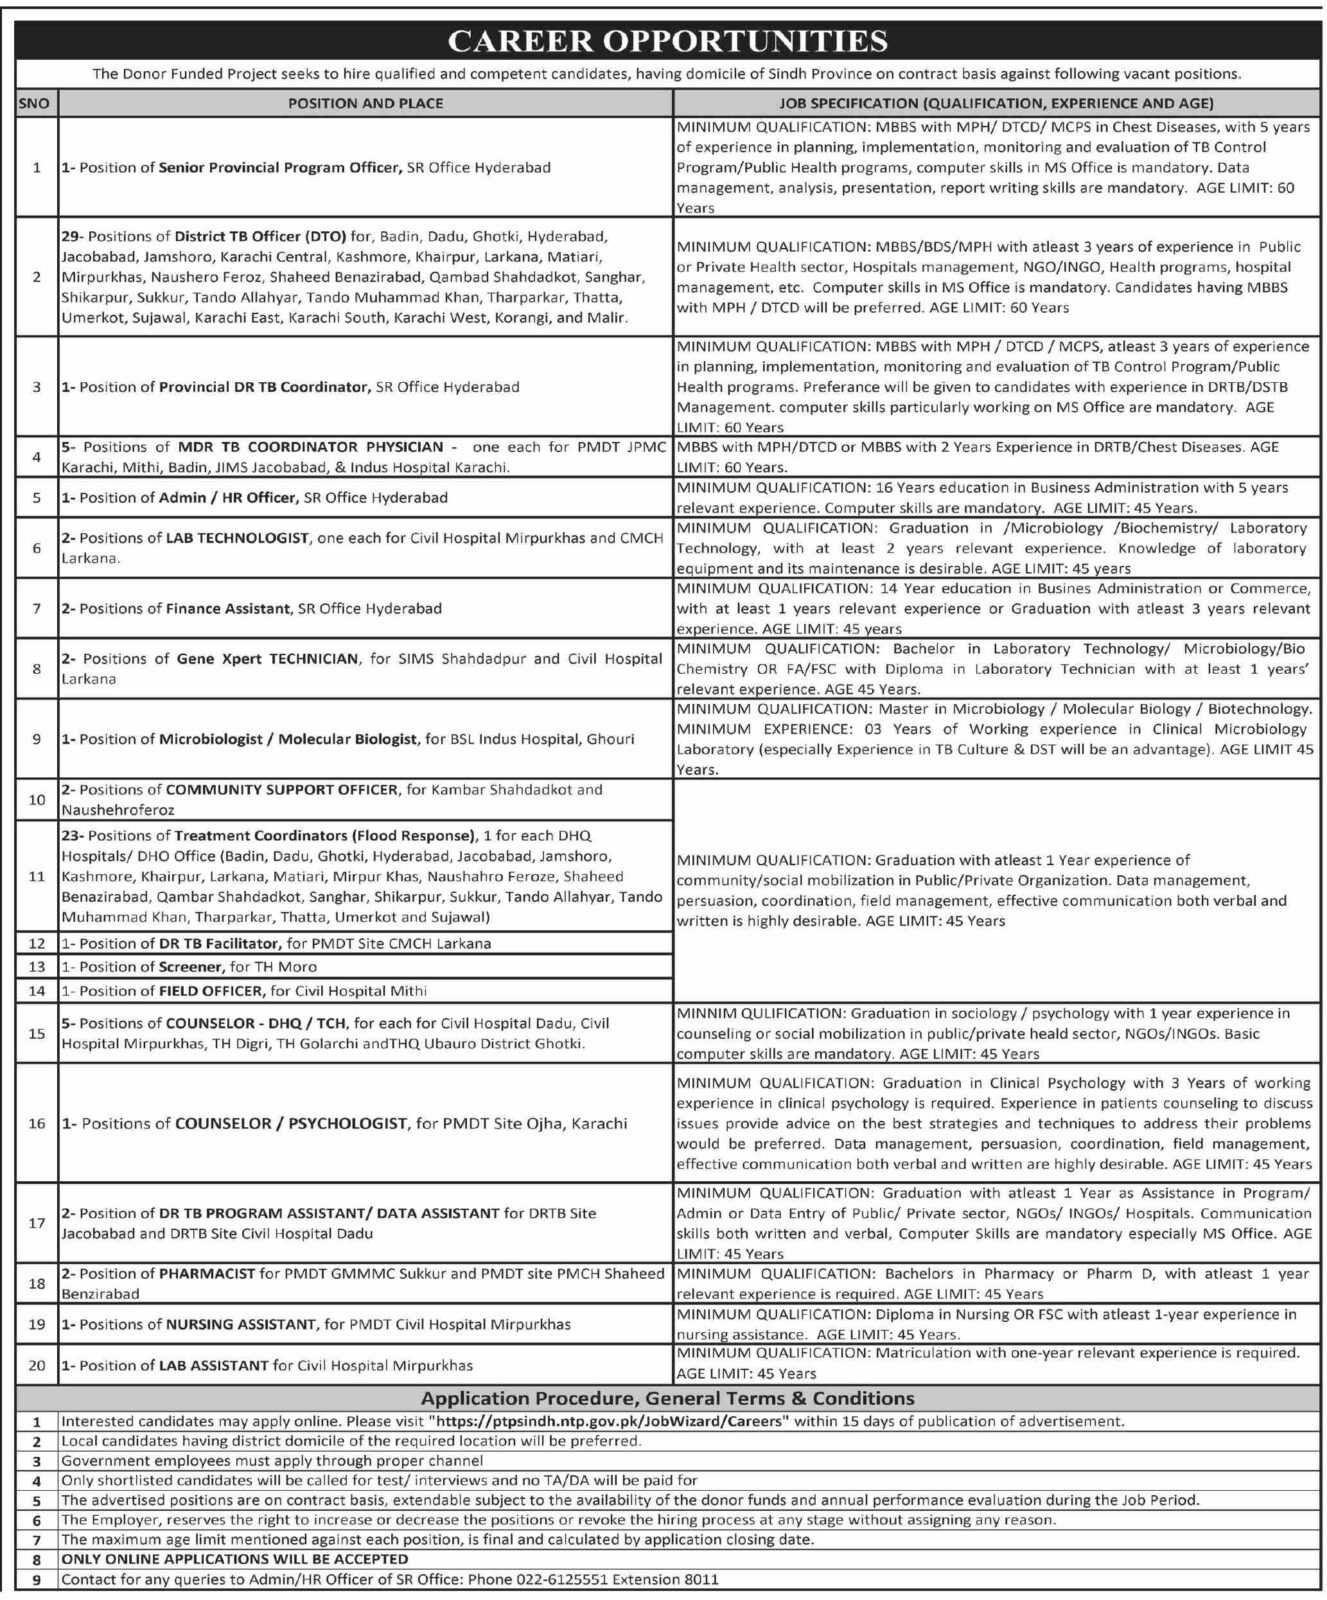 Donor Funded Project Jobs in Sindh 2023